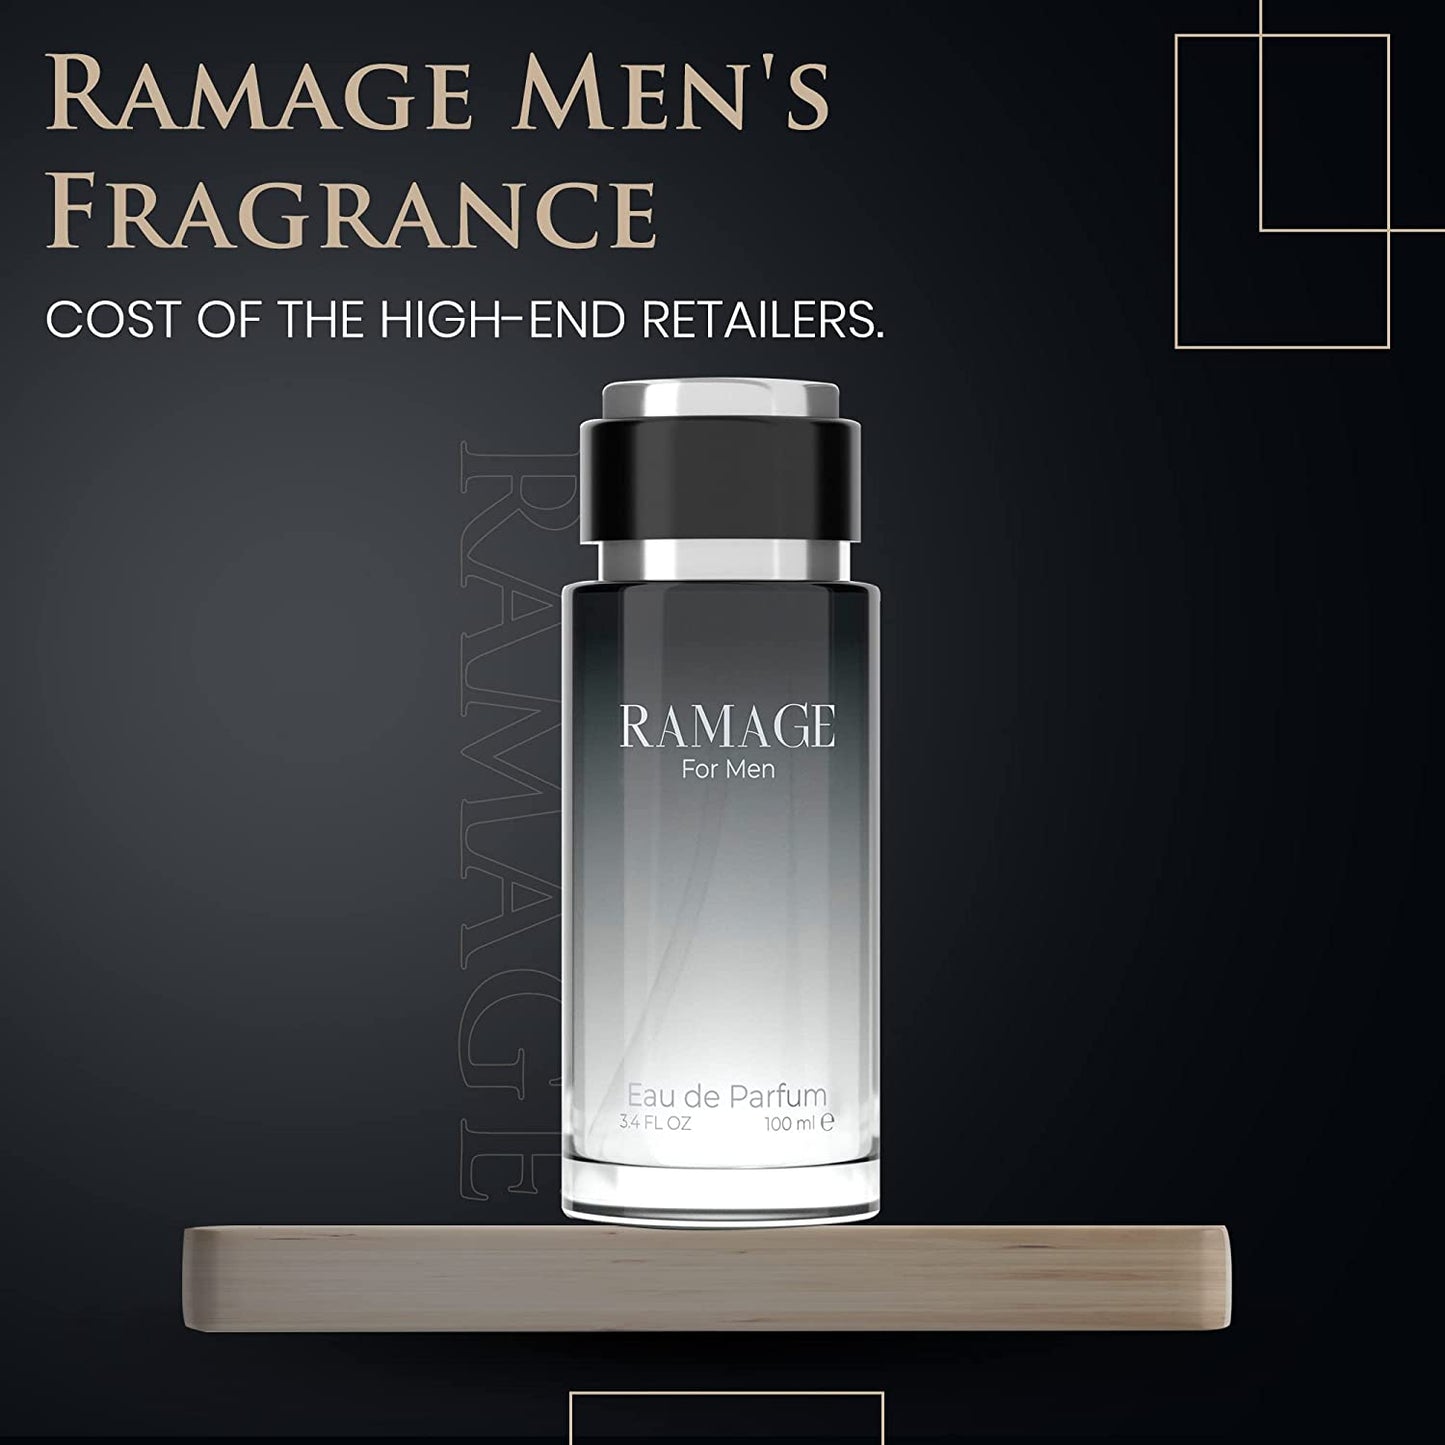 Regal Fragrances Mens Cologne Ramage - Inspired by the Scent of Dior's Sauvage - Earthy, Woody Tonka Bean and Sandalwood Scent (100 ML)